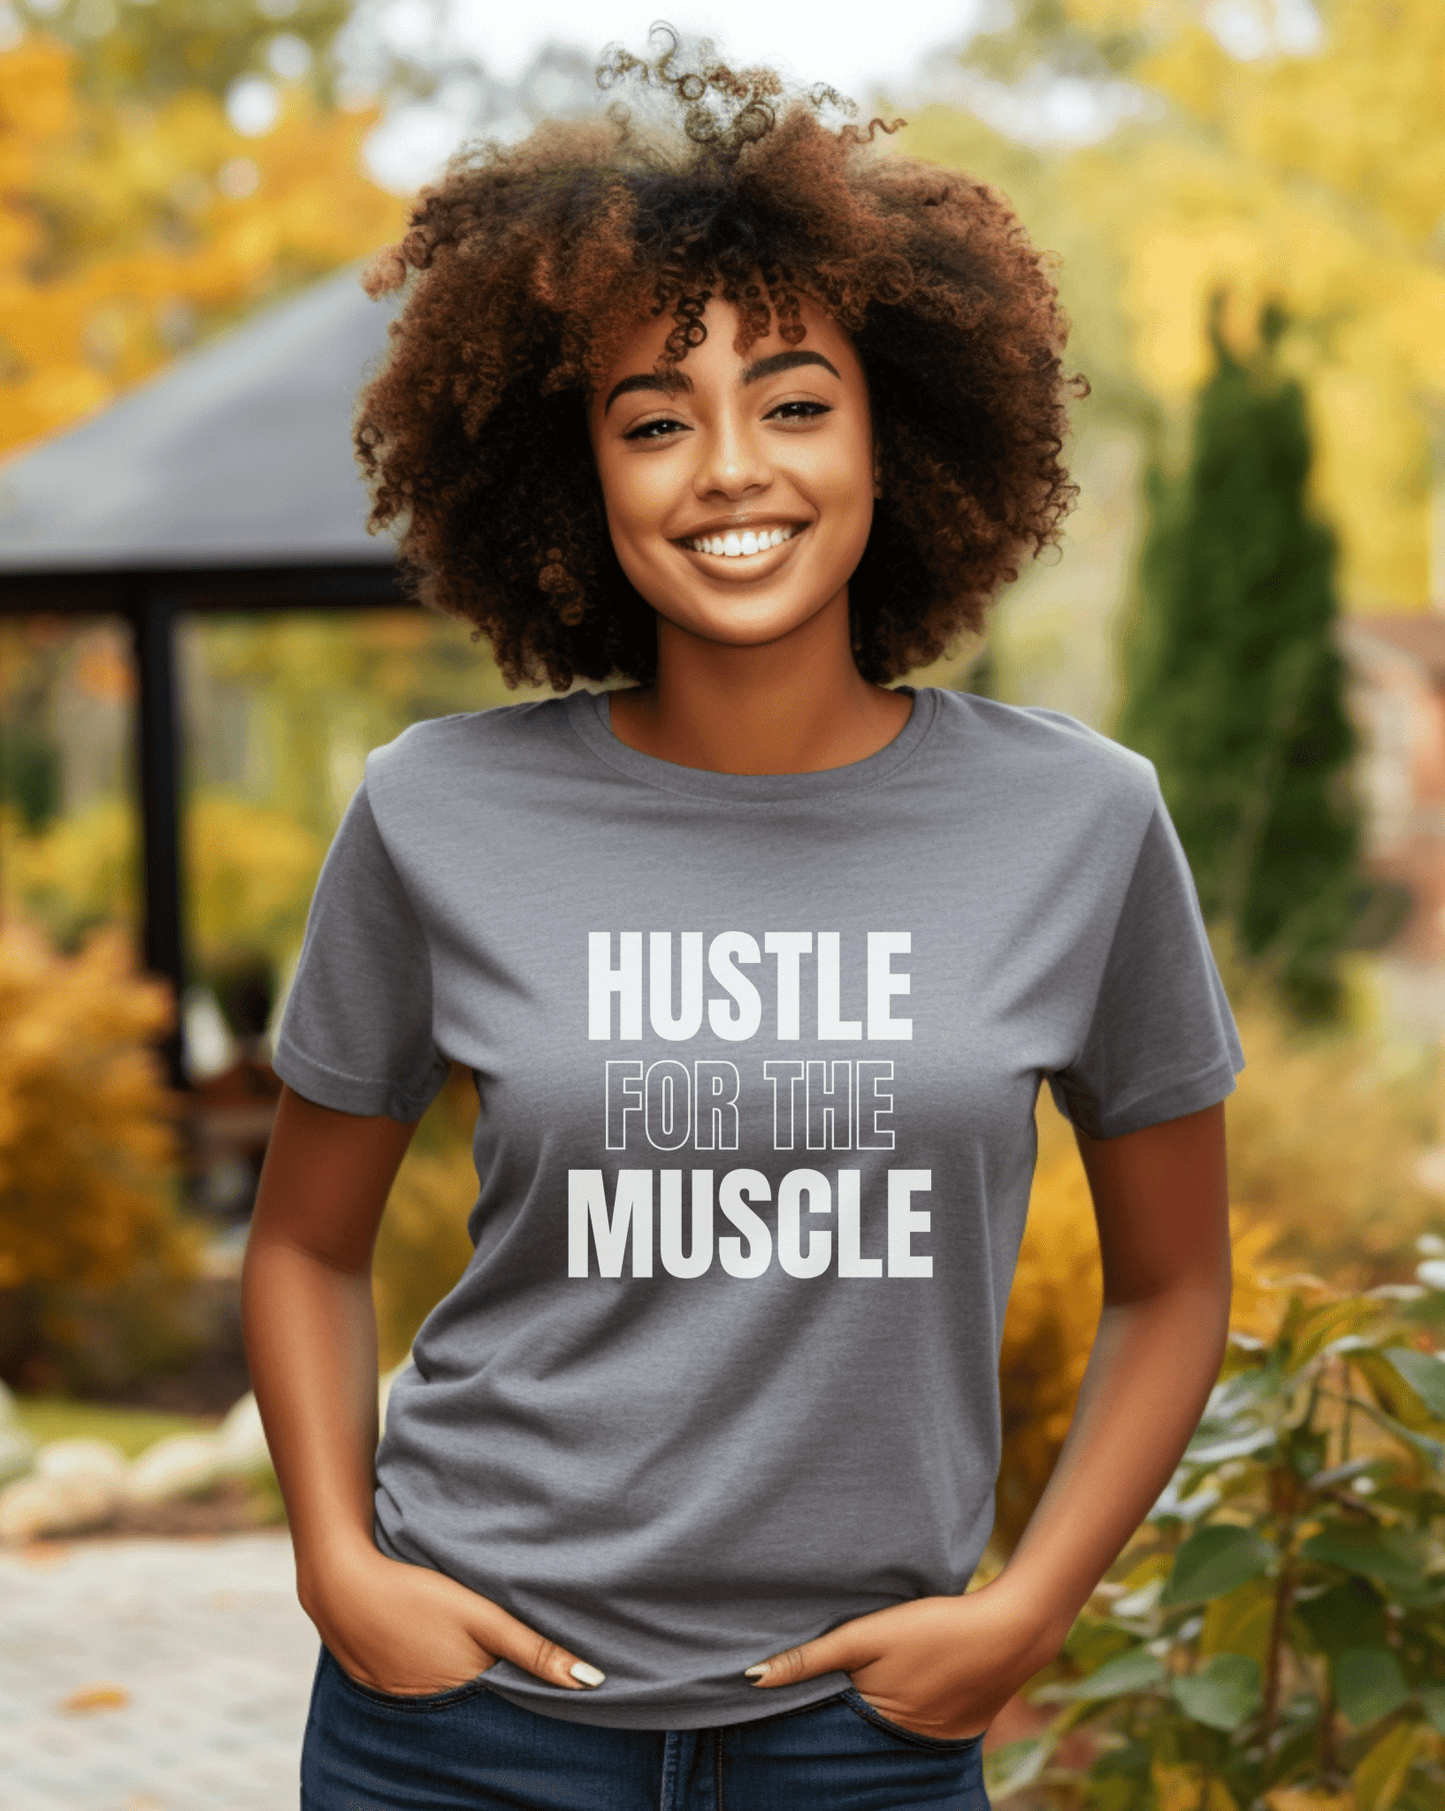 Hustle for the Muscle Gym Shirt - Get Strong, Unisex Short Sleeve Tee - The Pura Vida Co.